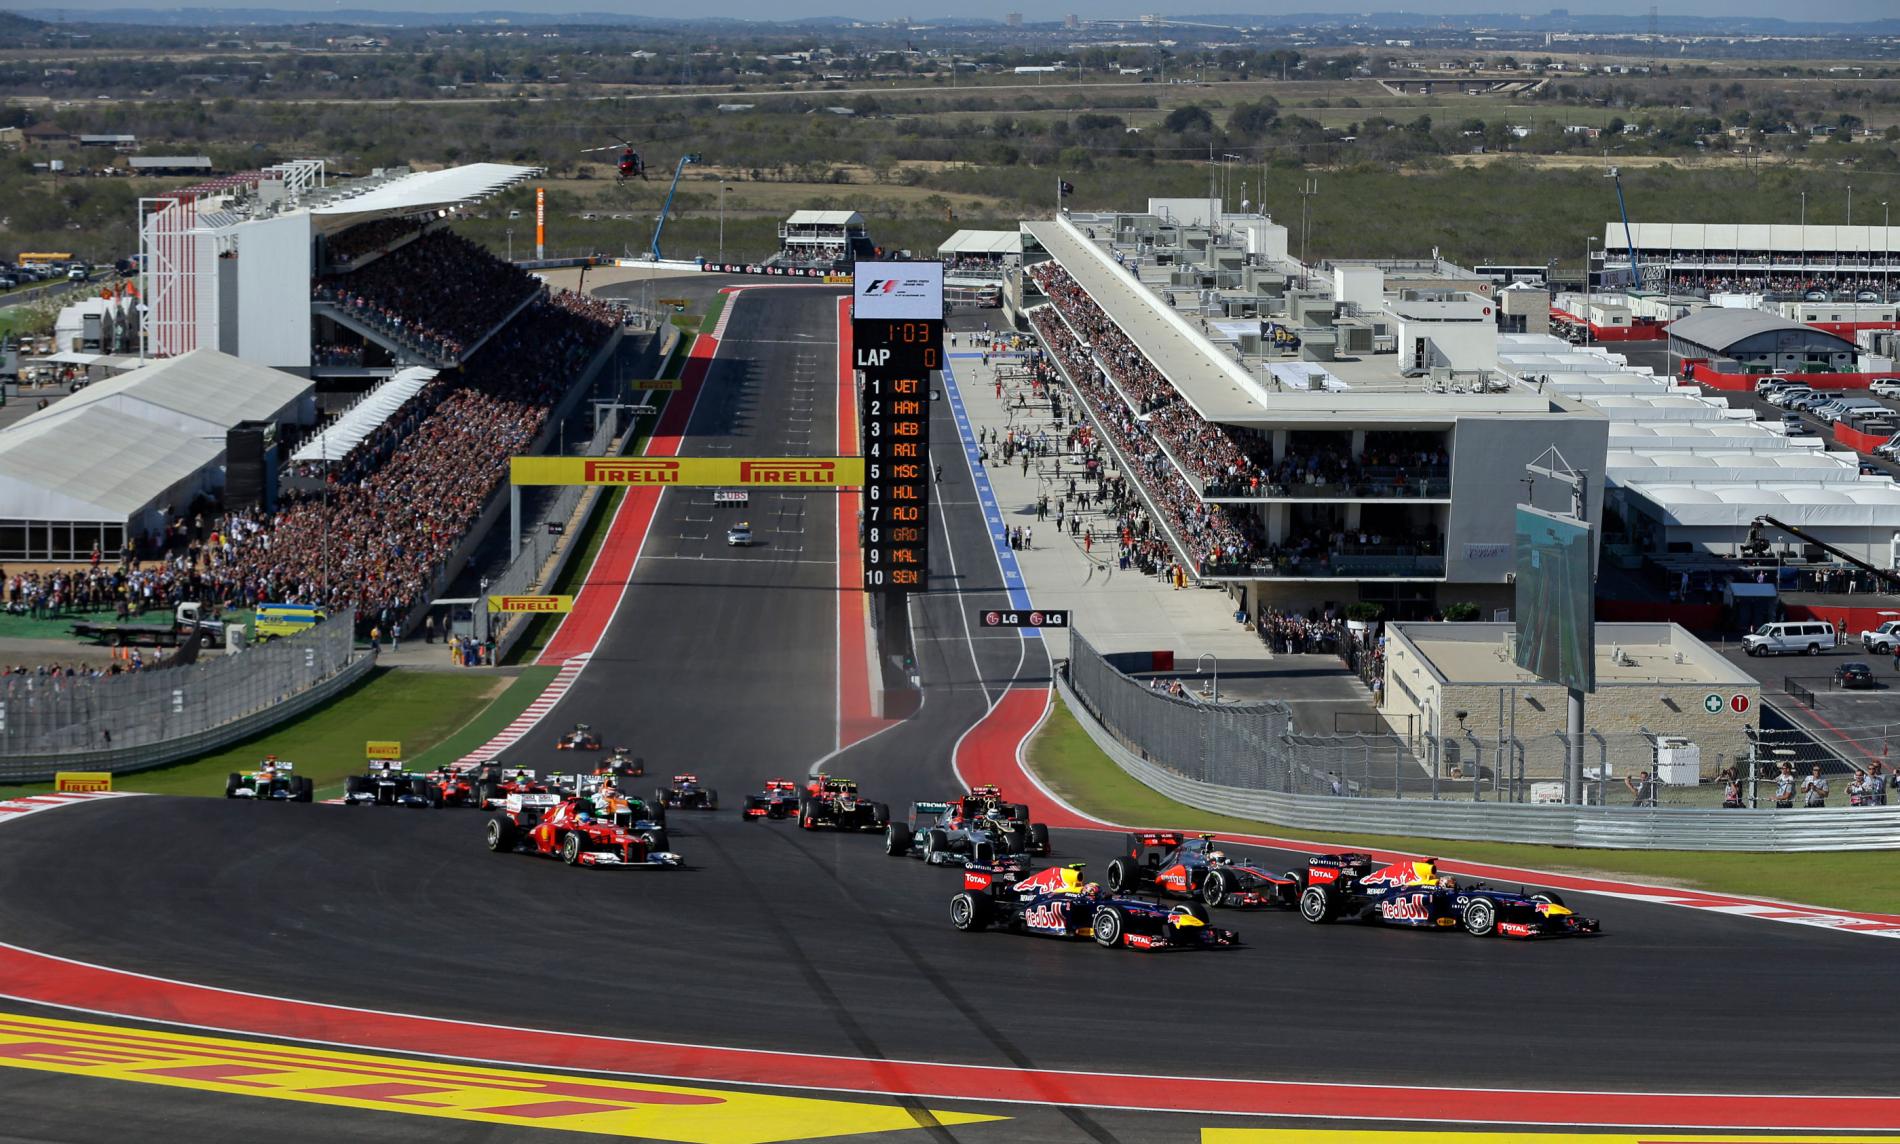 F1 officially cancels its 2020 race in Austin's Circuit of the Americas.